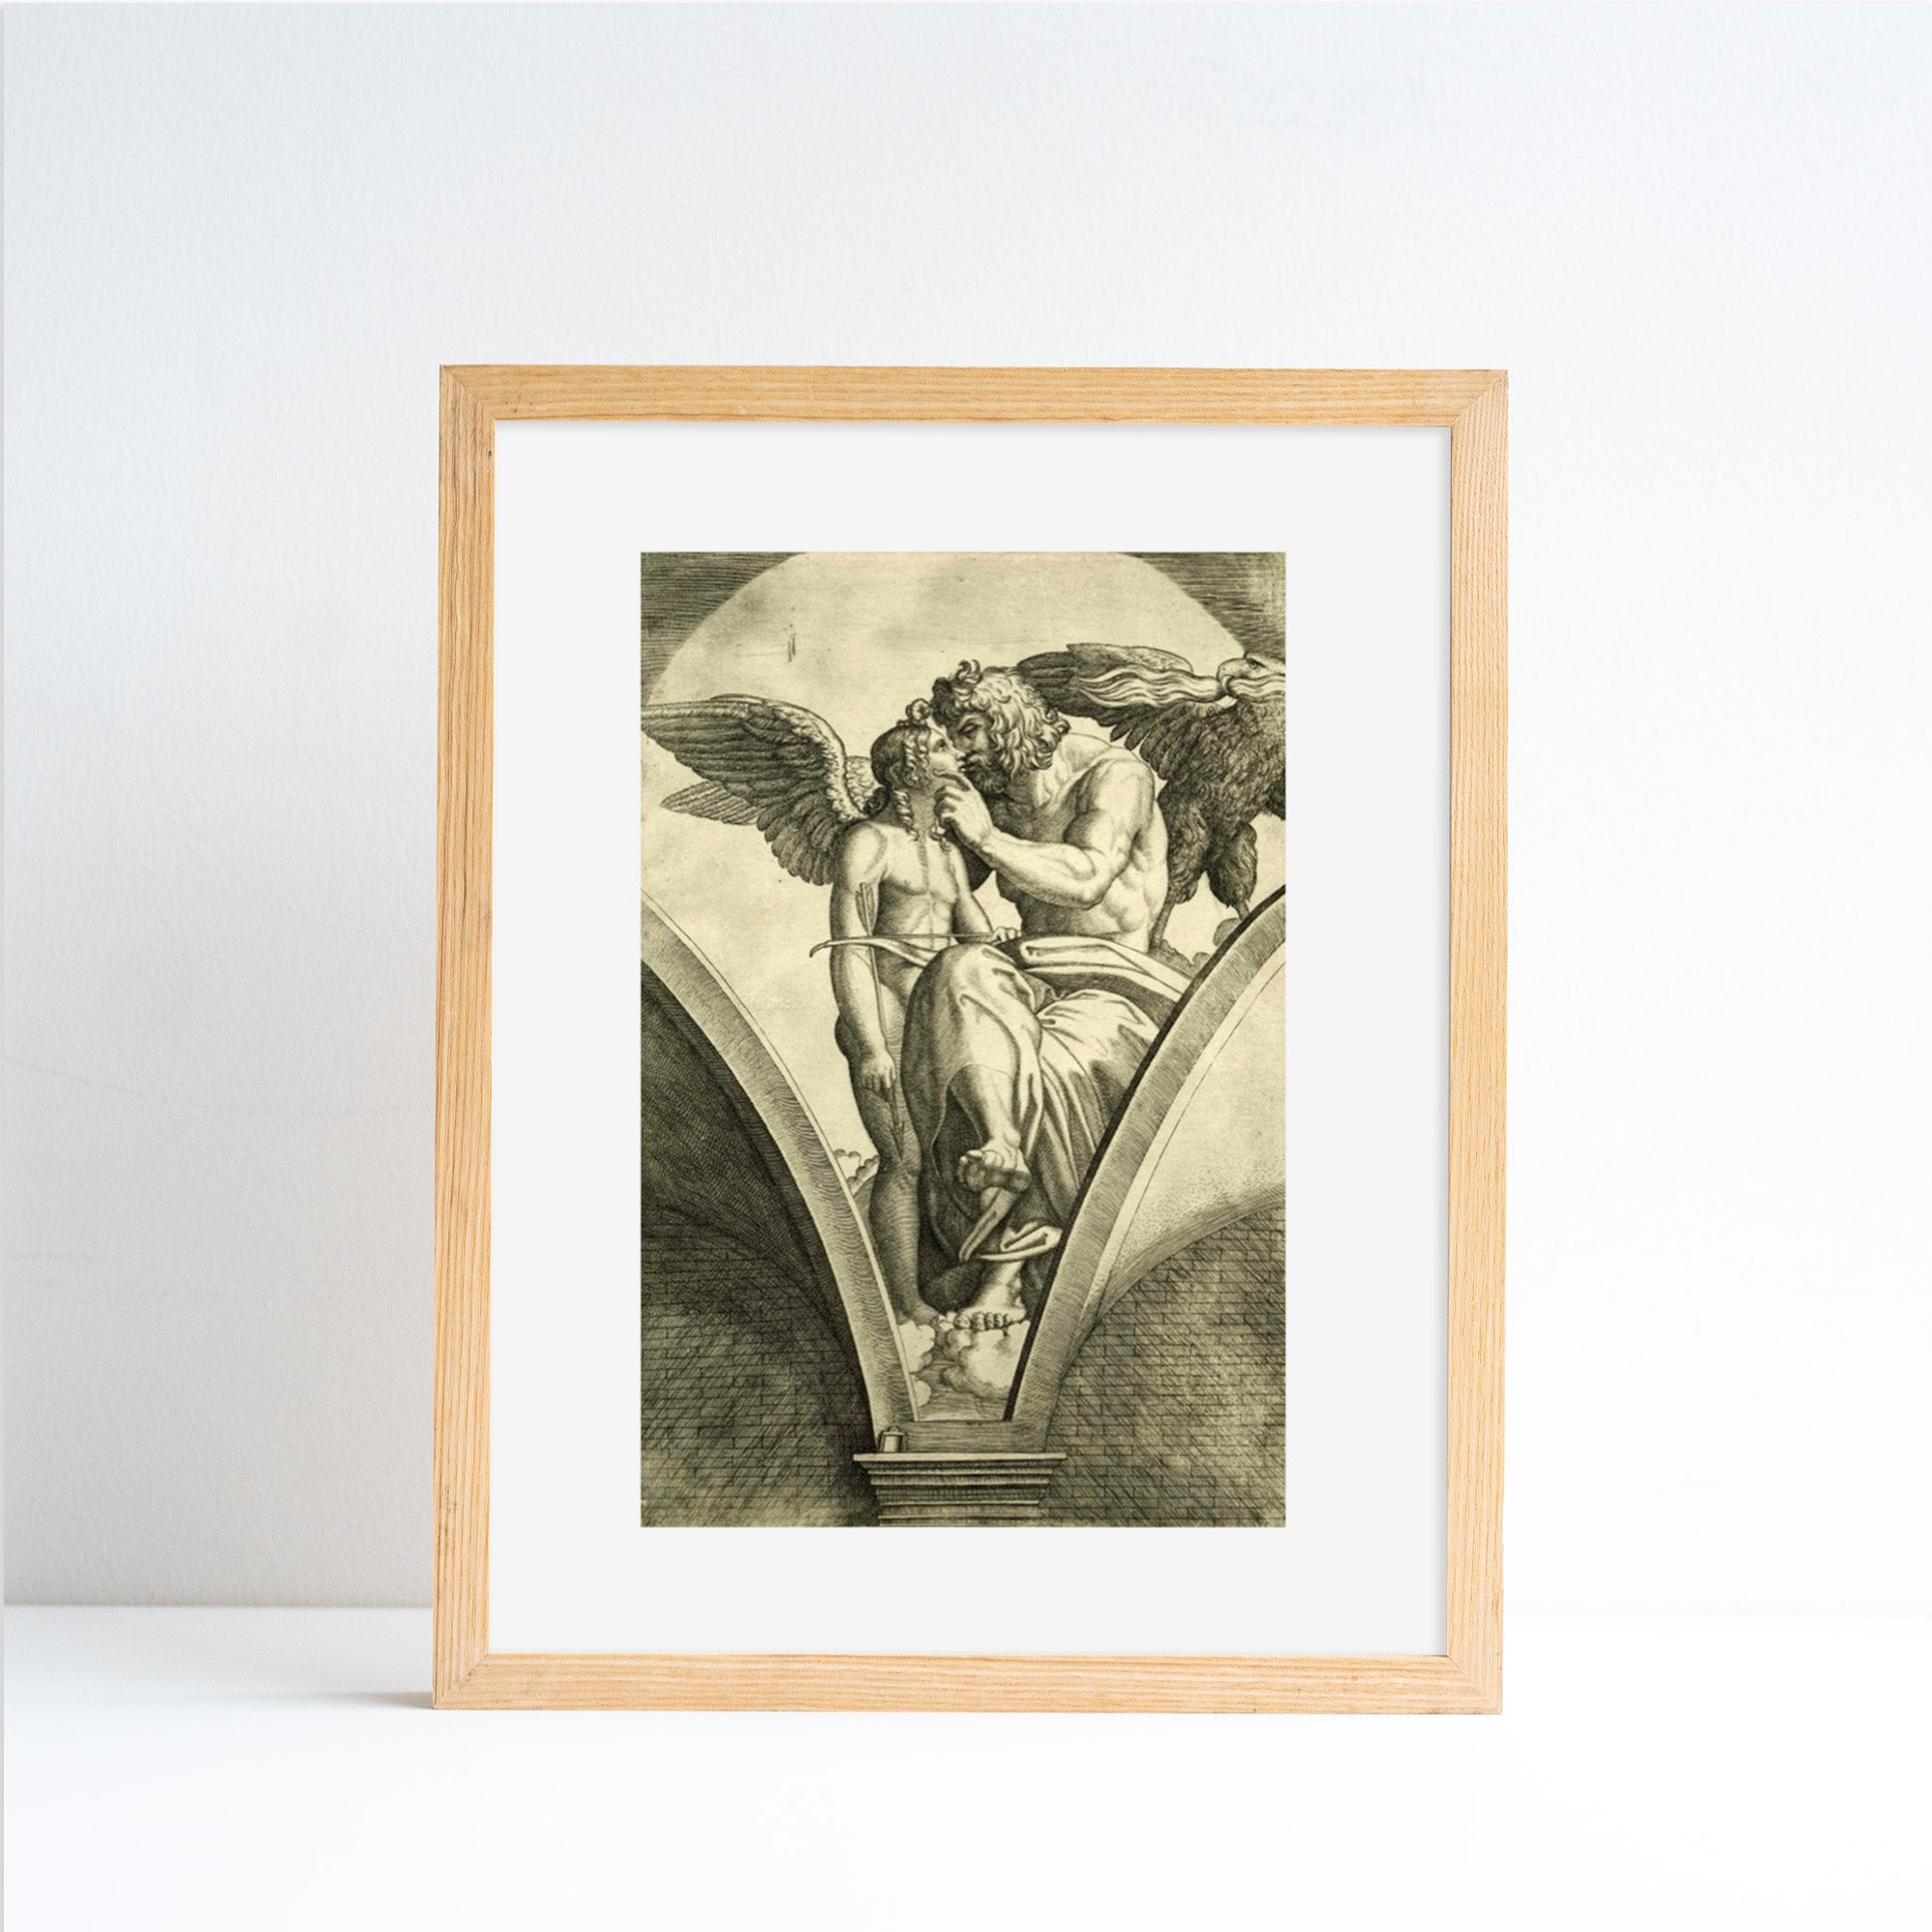 Reproduction of classic work by Raimondi of Jupiter Embracing Cupid